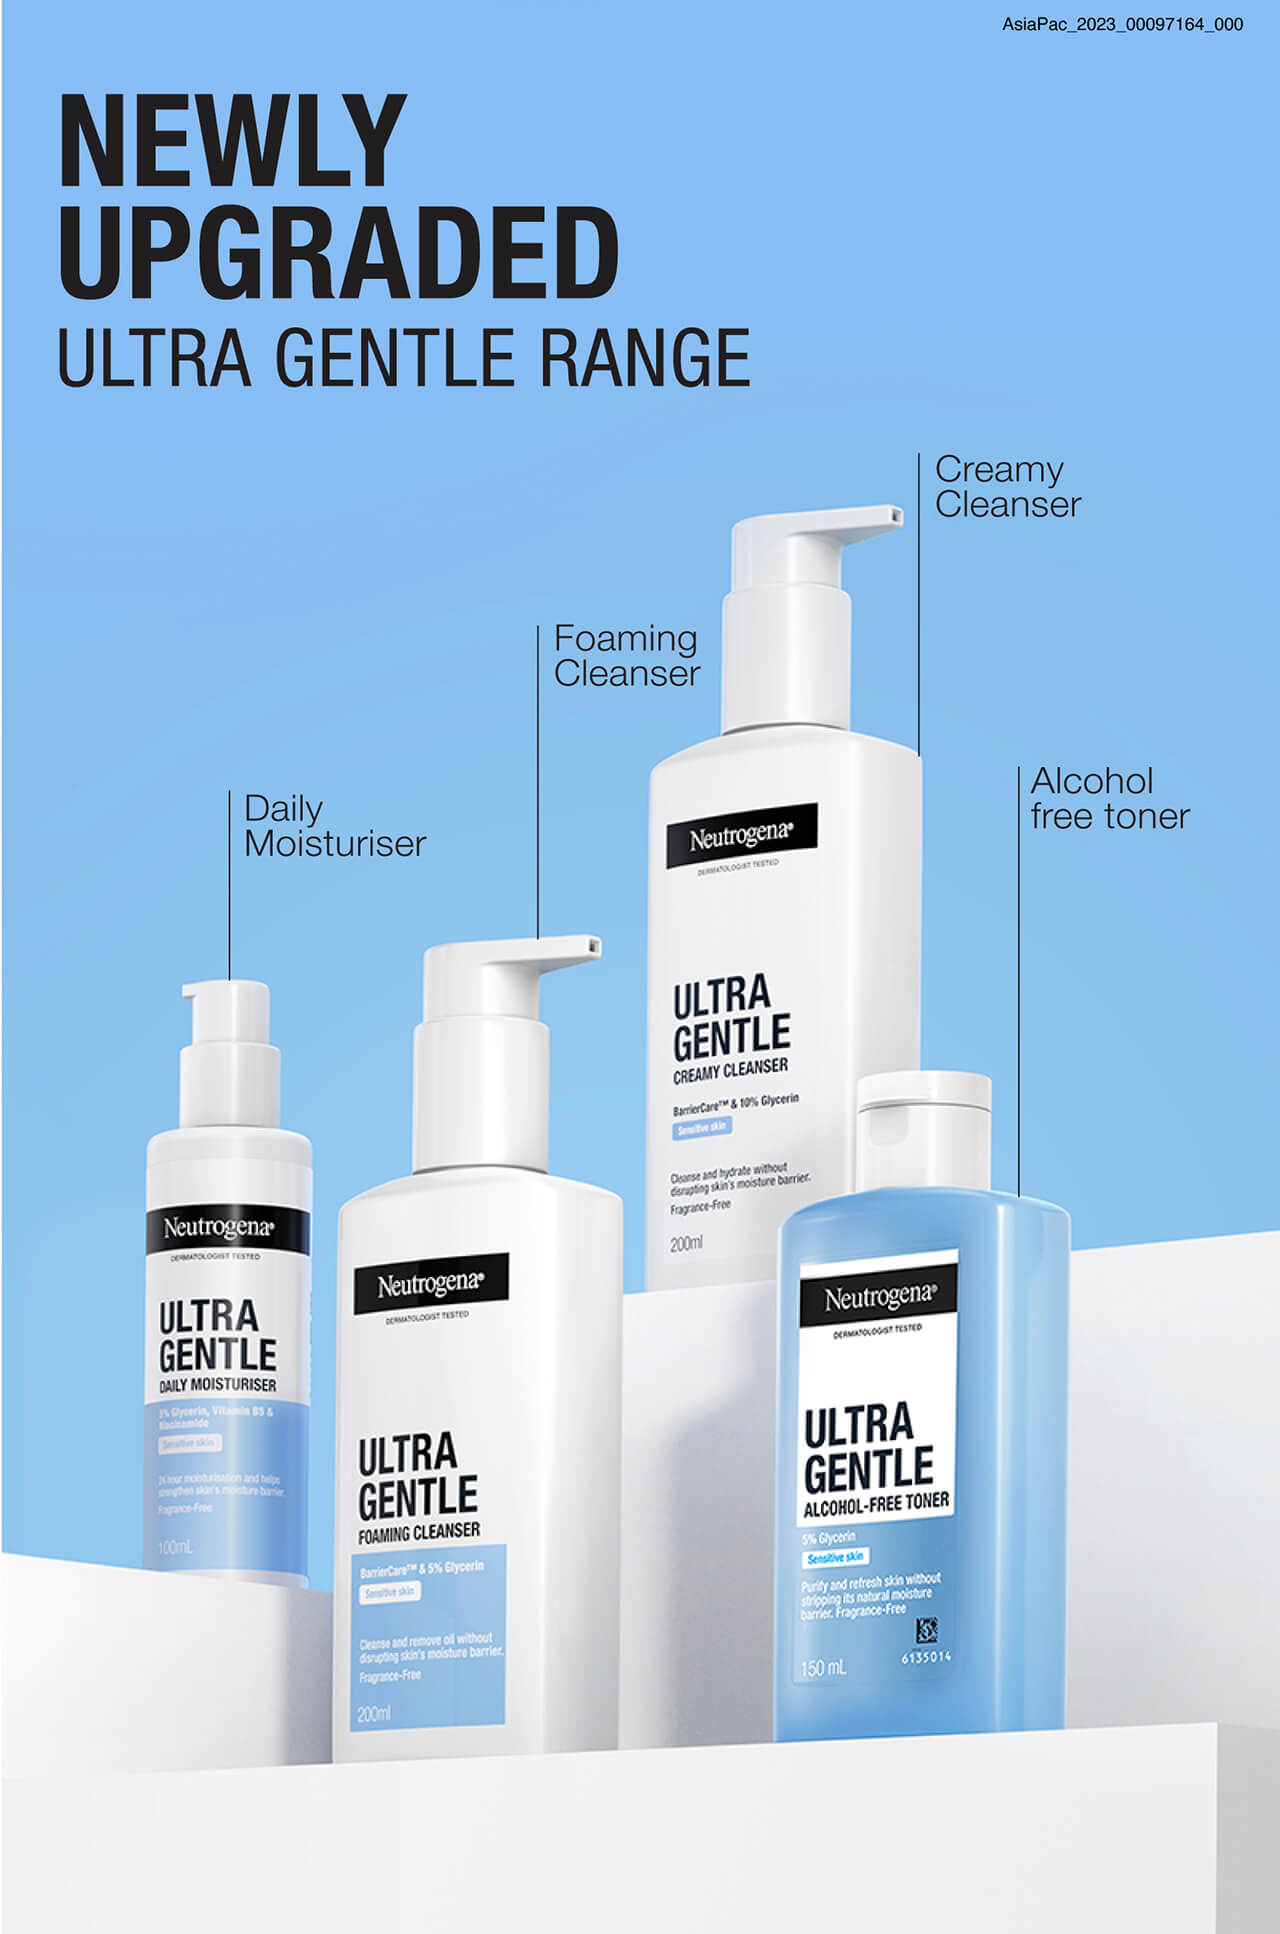 NEWLY UPGRADED ULTRA GENTLE RANGE  Daily Moisturiser Foaming Cleanser Creamy Cleanser Alcohol free toner